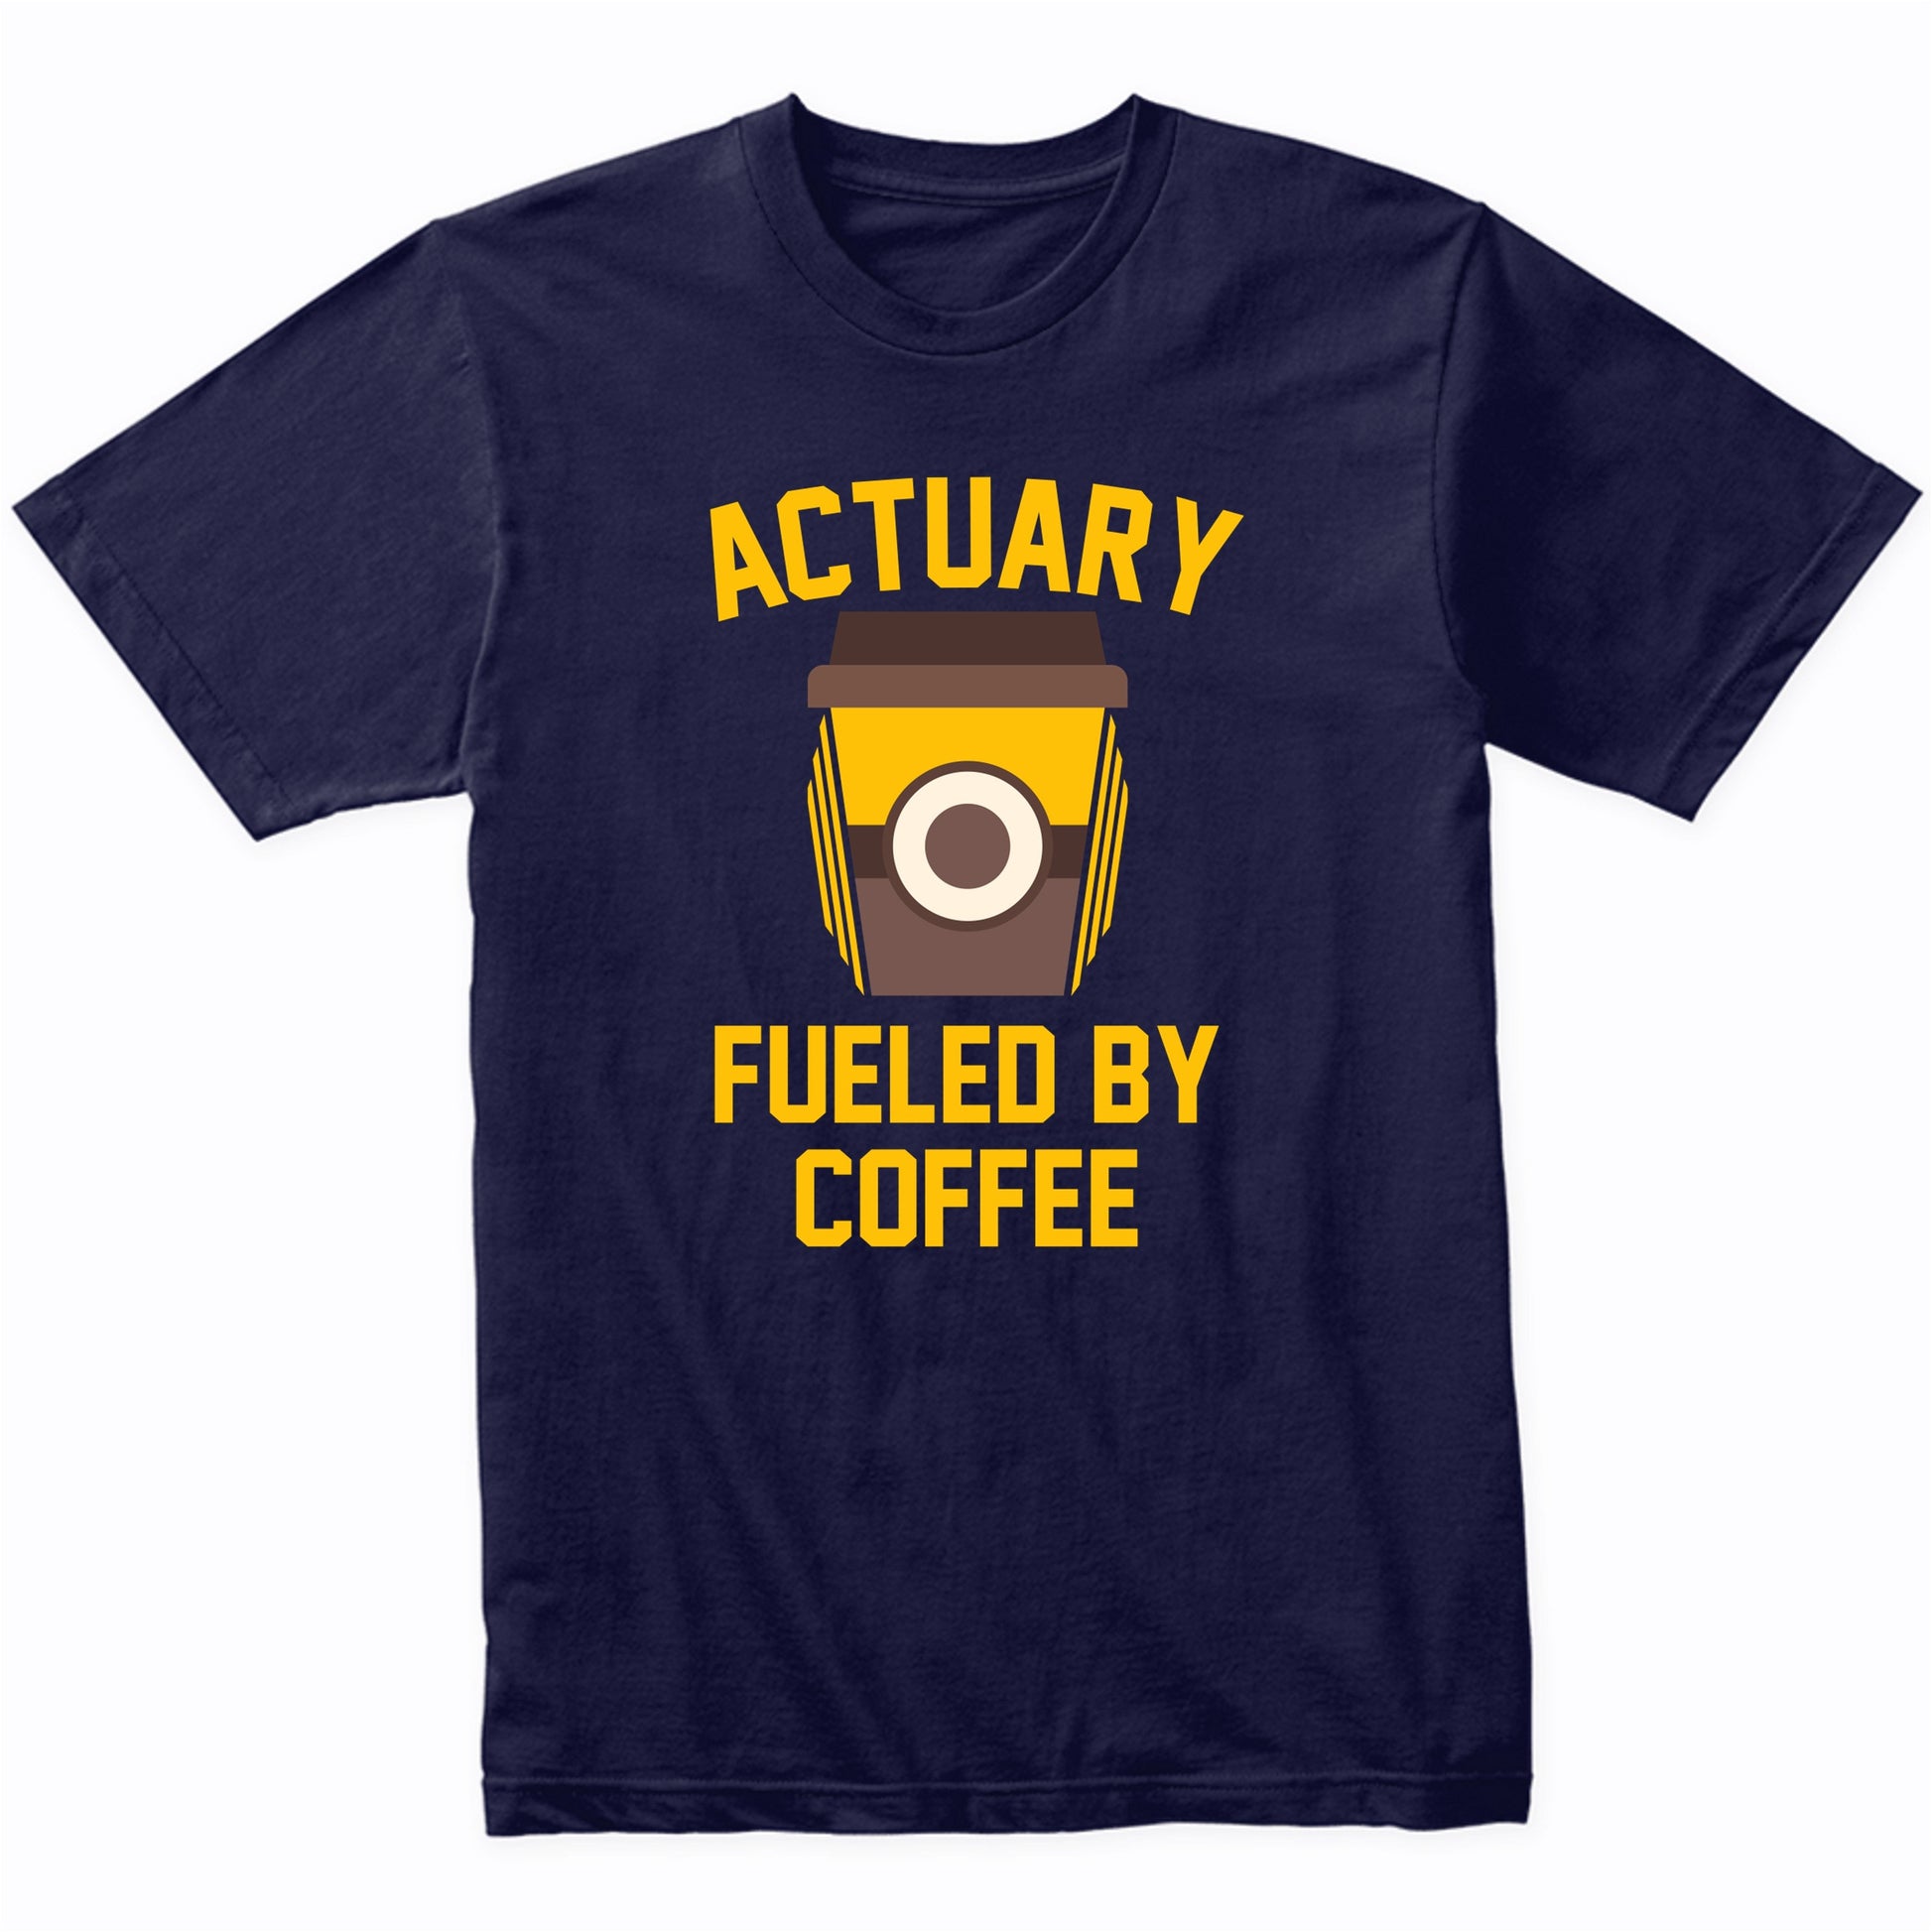 Actuary Fueled By Coffee Funny Actuarial Shirt